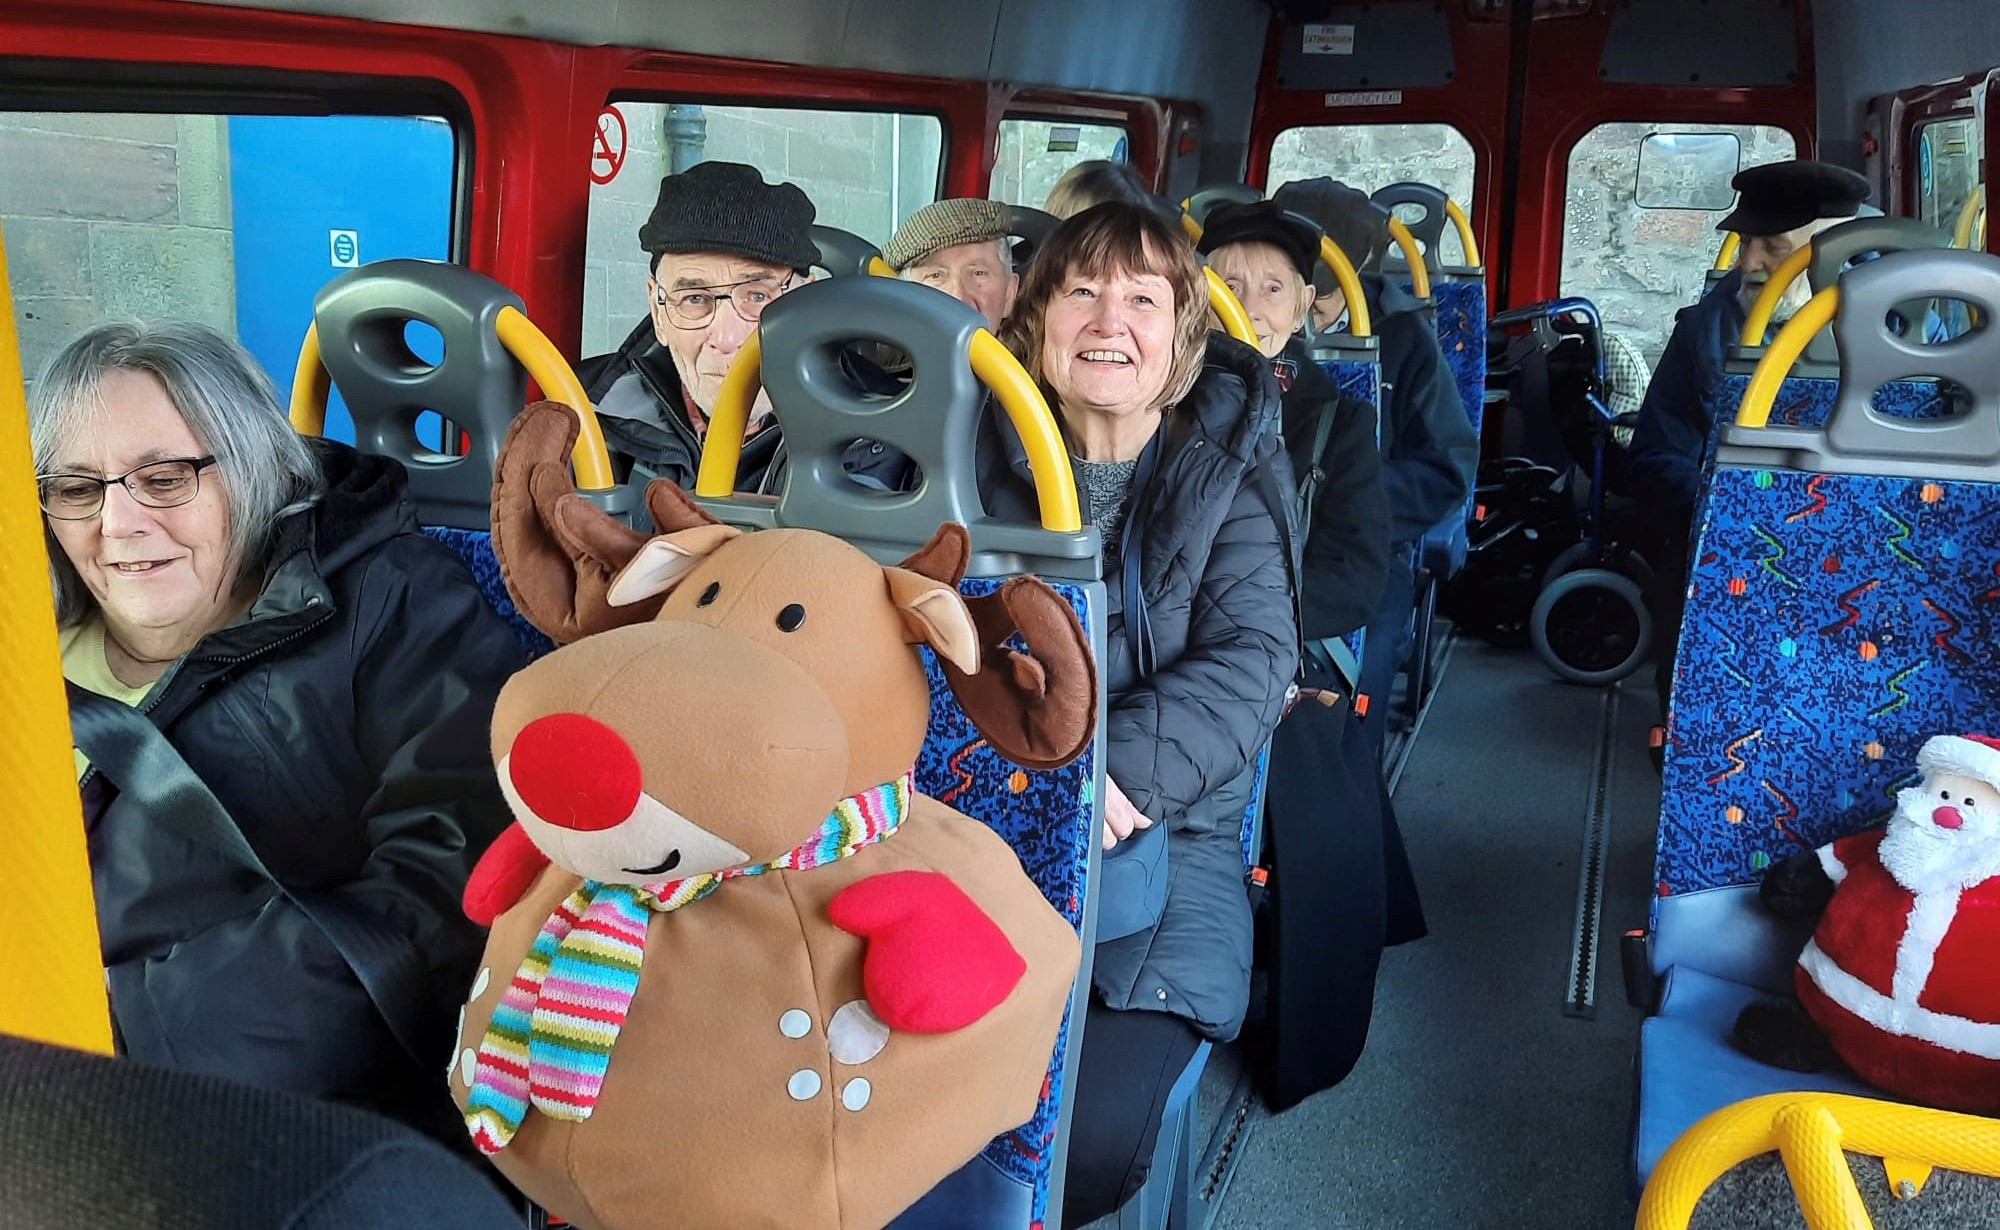 Group members and a large stuffed toy sitting on a bus that has blue and yellow seats.